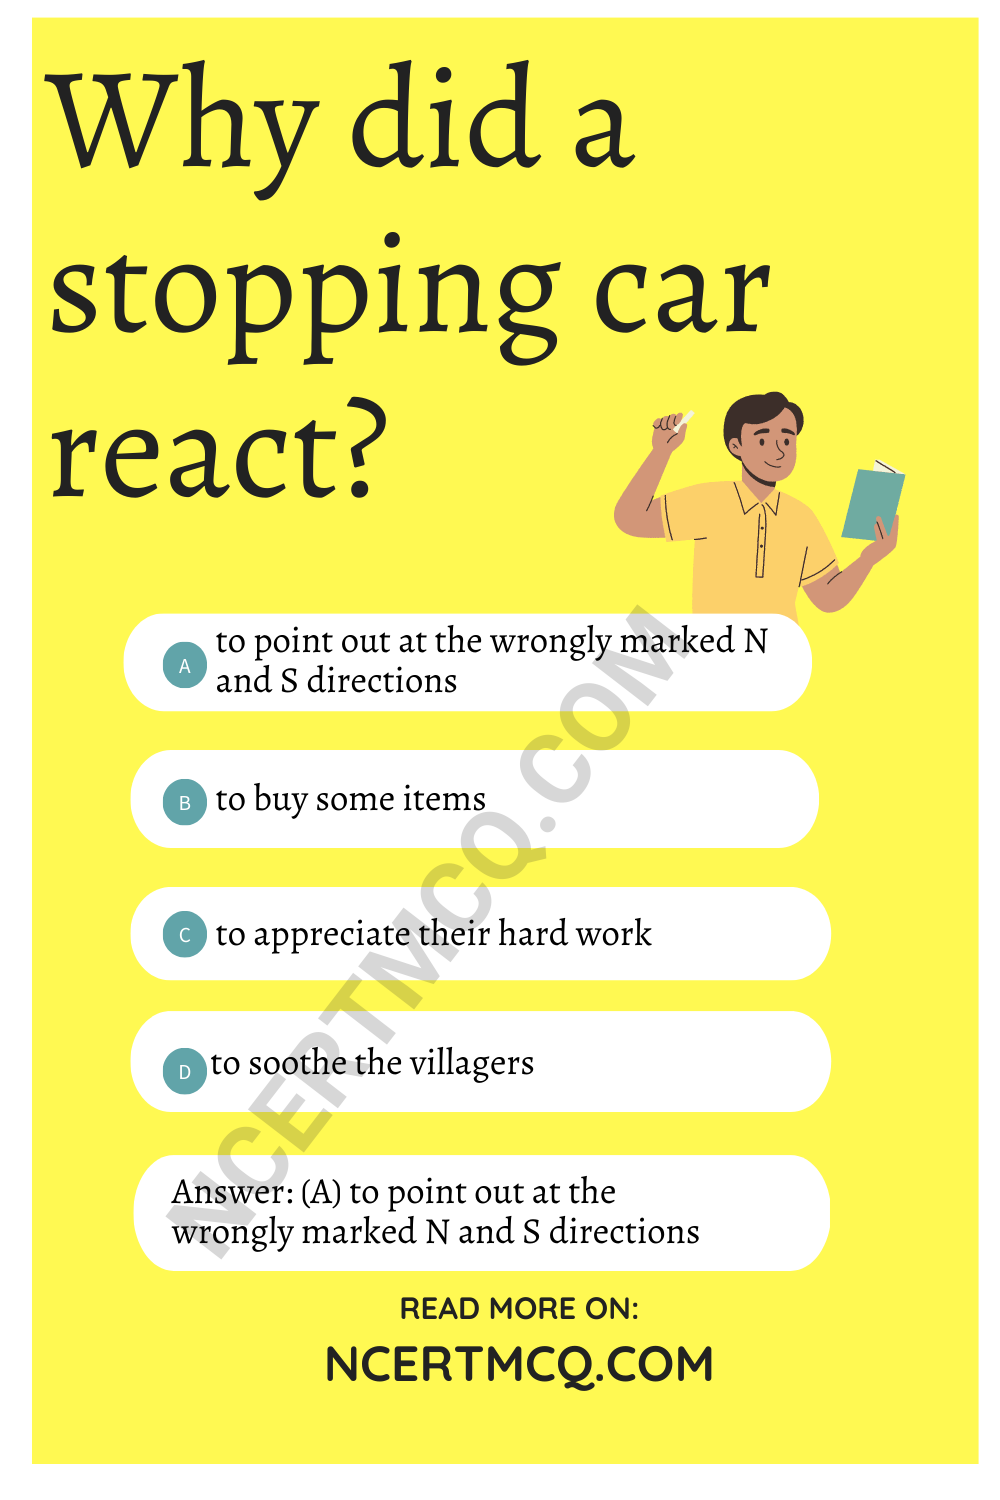 Why did a stopping car react?